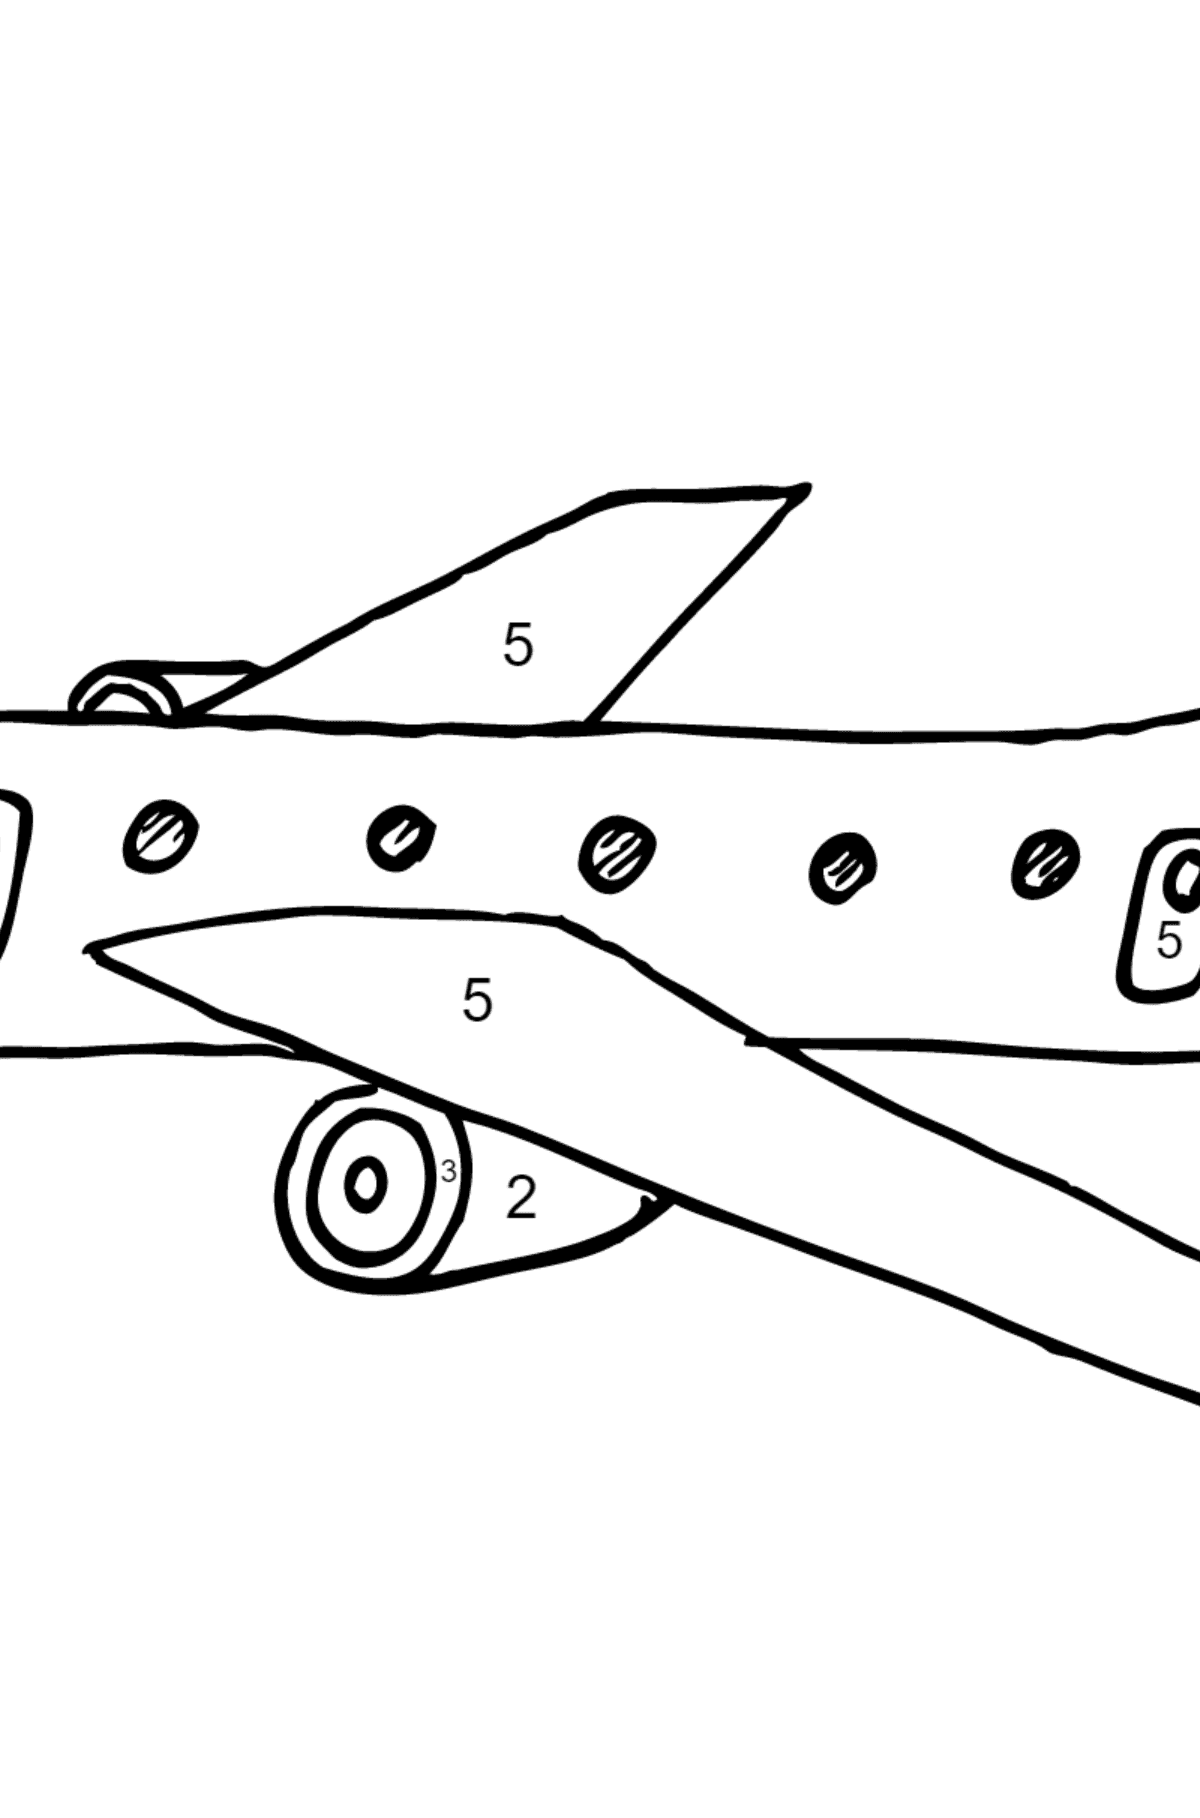 Coloring Page - A Commercial Jet - Coloring by Numbers for Children